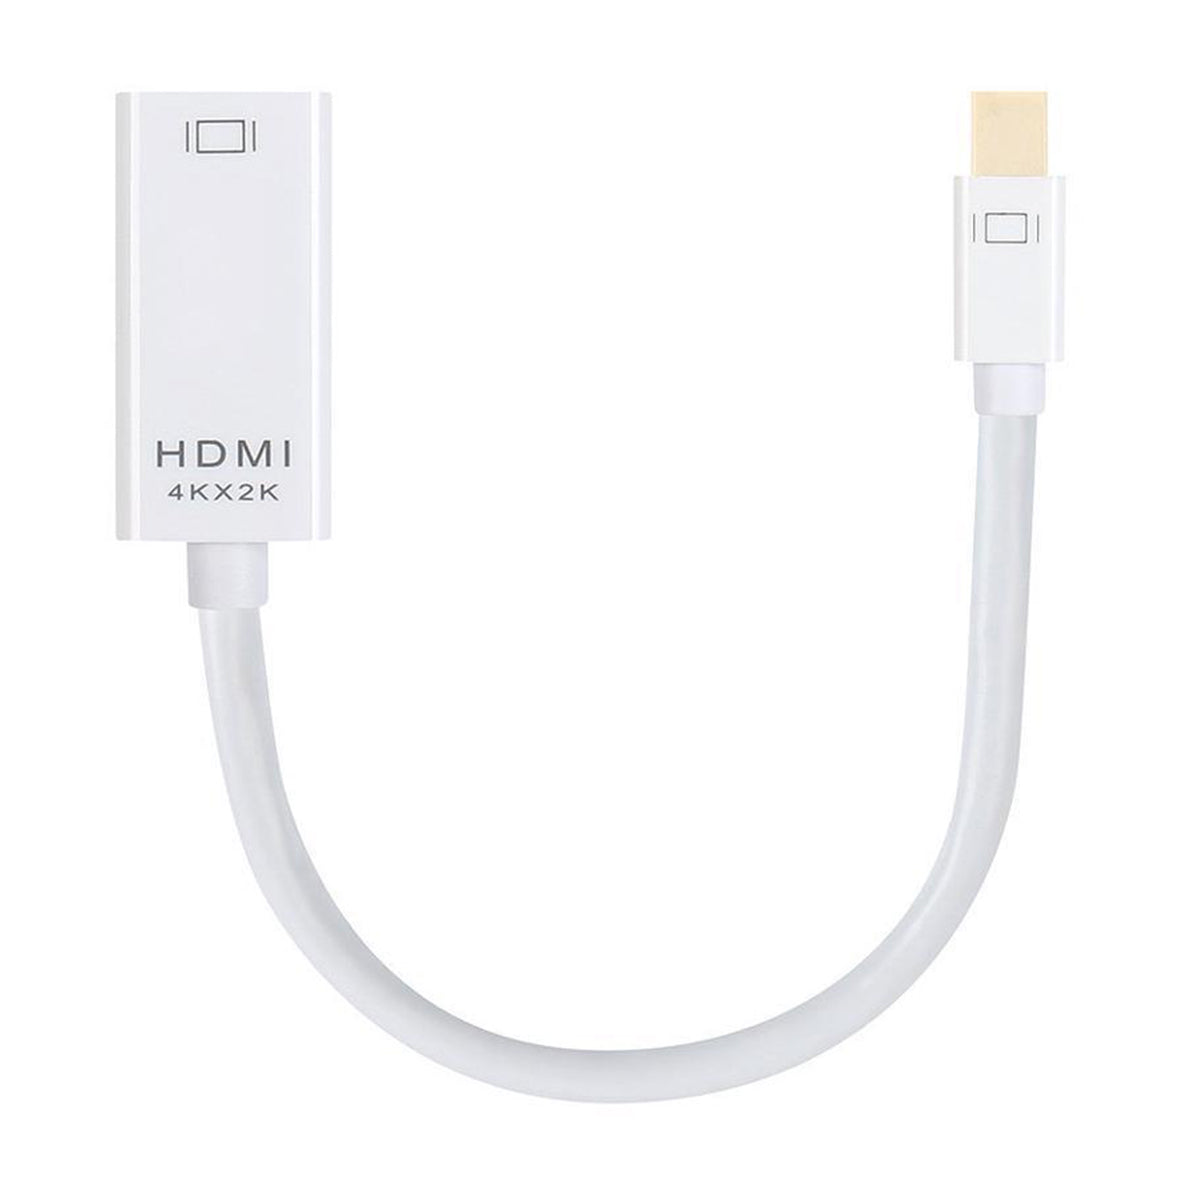 Mini DP Male to HDMI Female Adapter, DP to HDMI Adapter